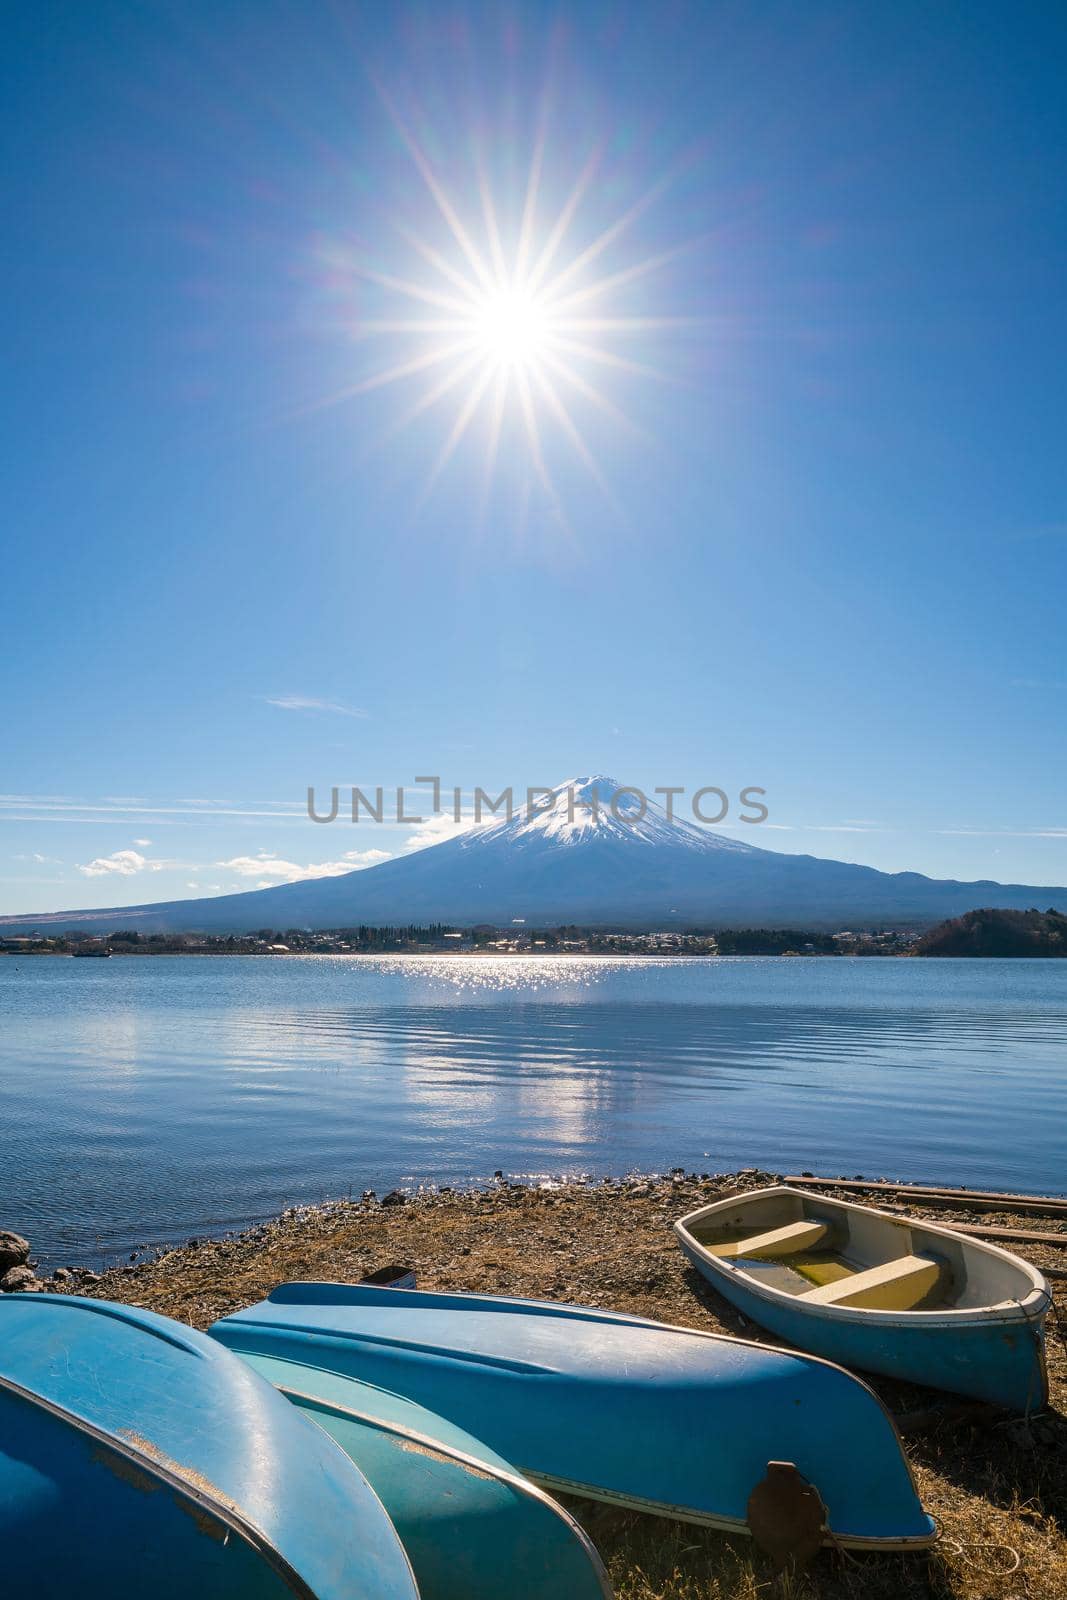 Sun star effect shot with Mountain Fuji and boats  by f11photo